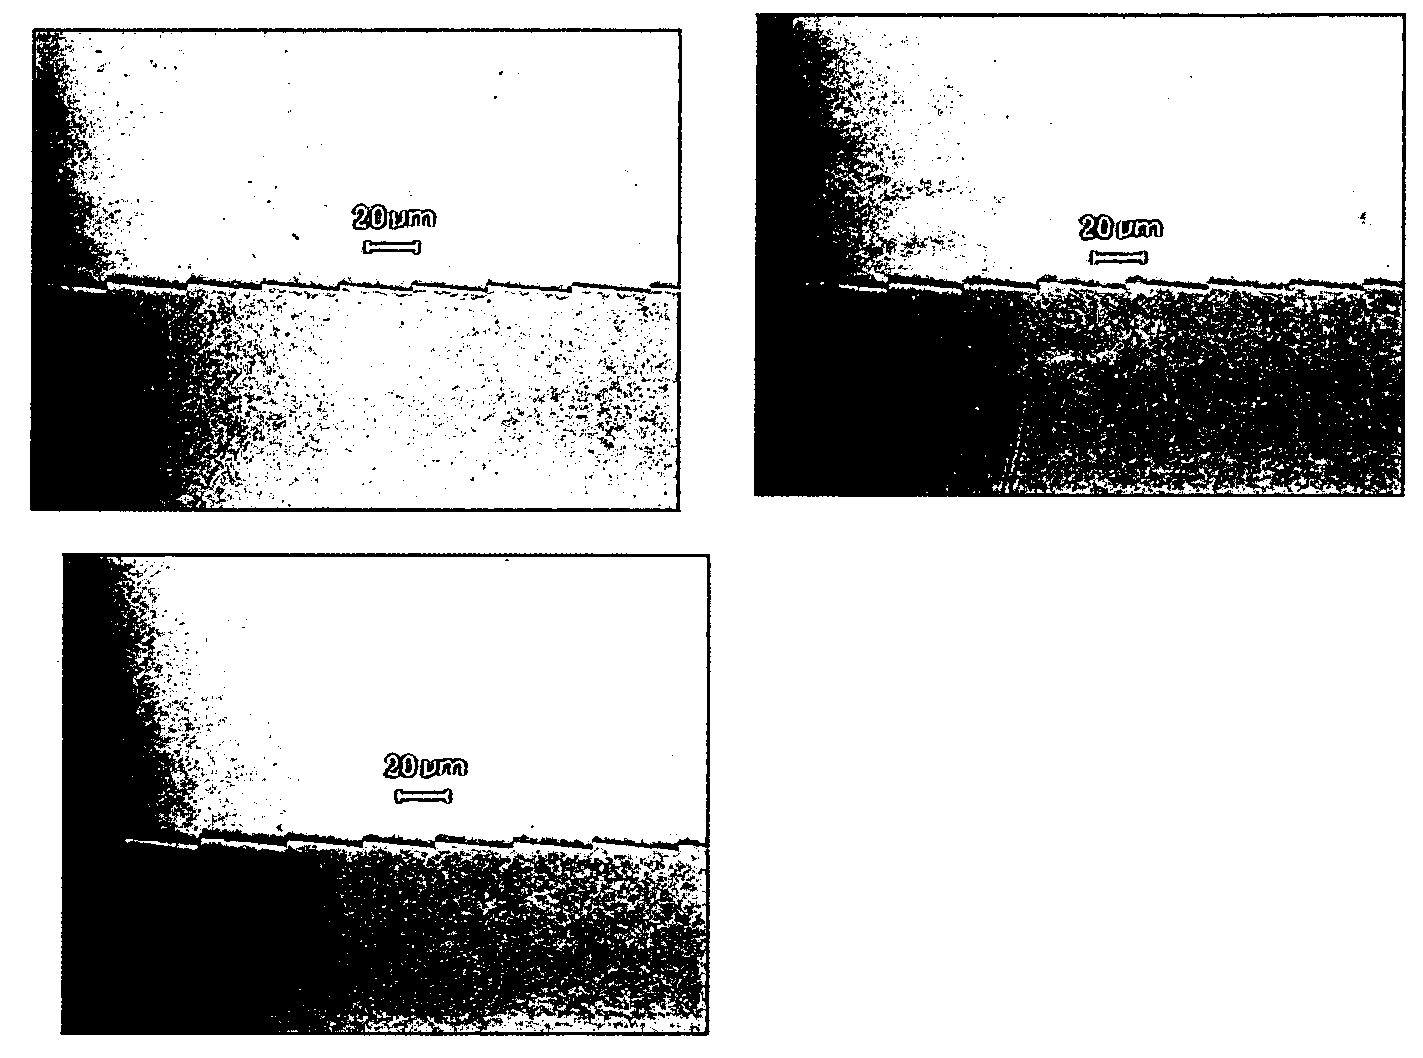 Article having a birefringent surface and microstructured features having a variable pitch or angles for use as a blur filter